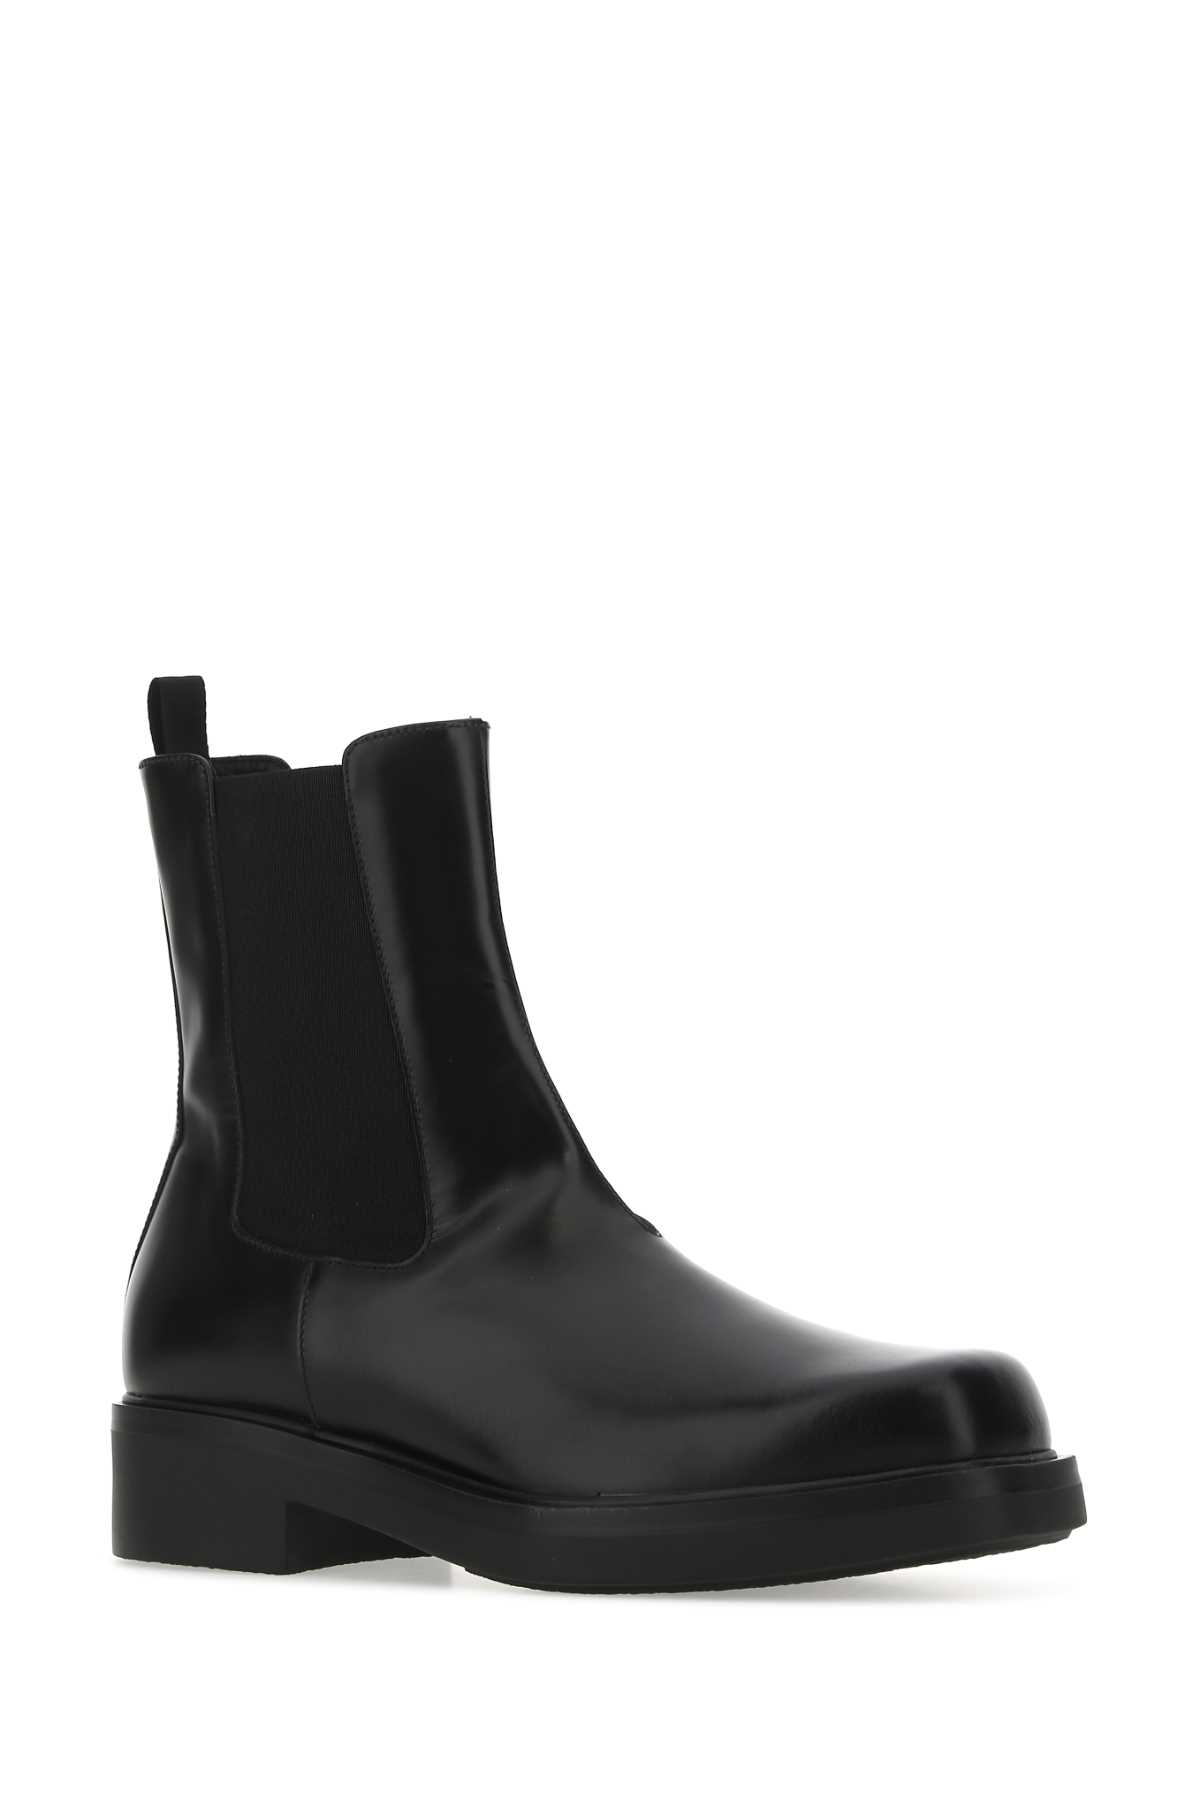 Prada Black Leather Ankle Boots In F0002